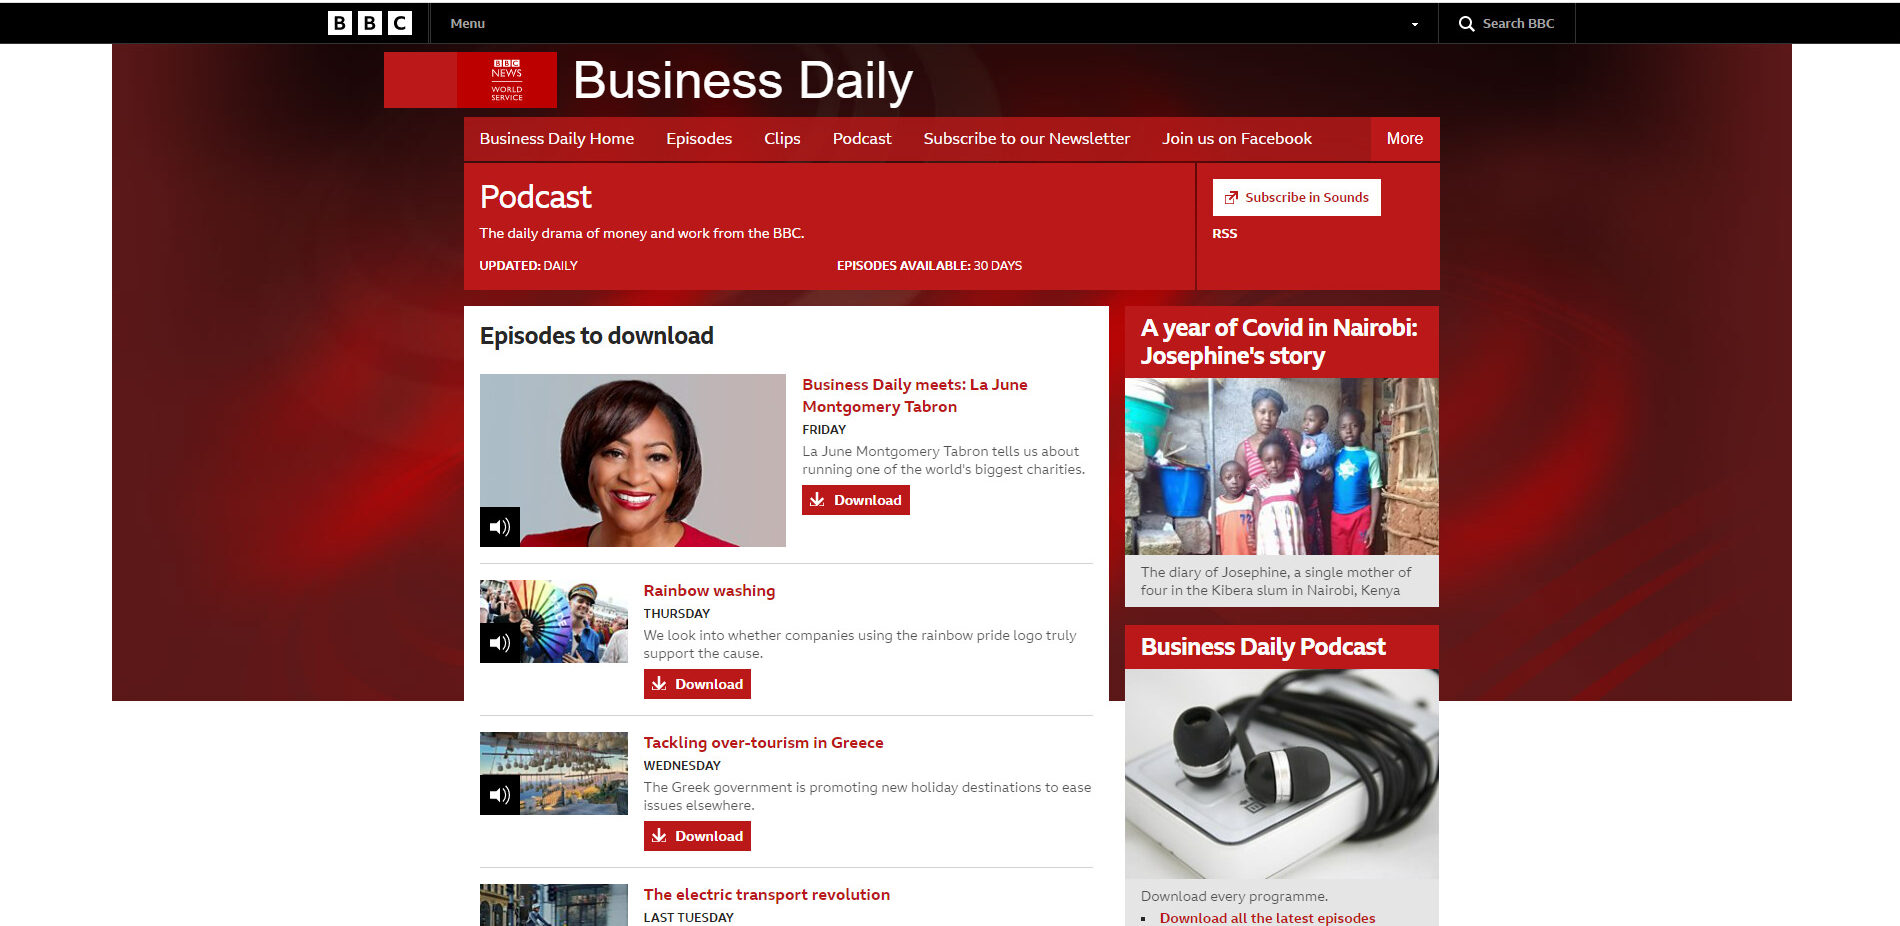 5.BBC Business Daily